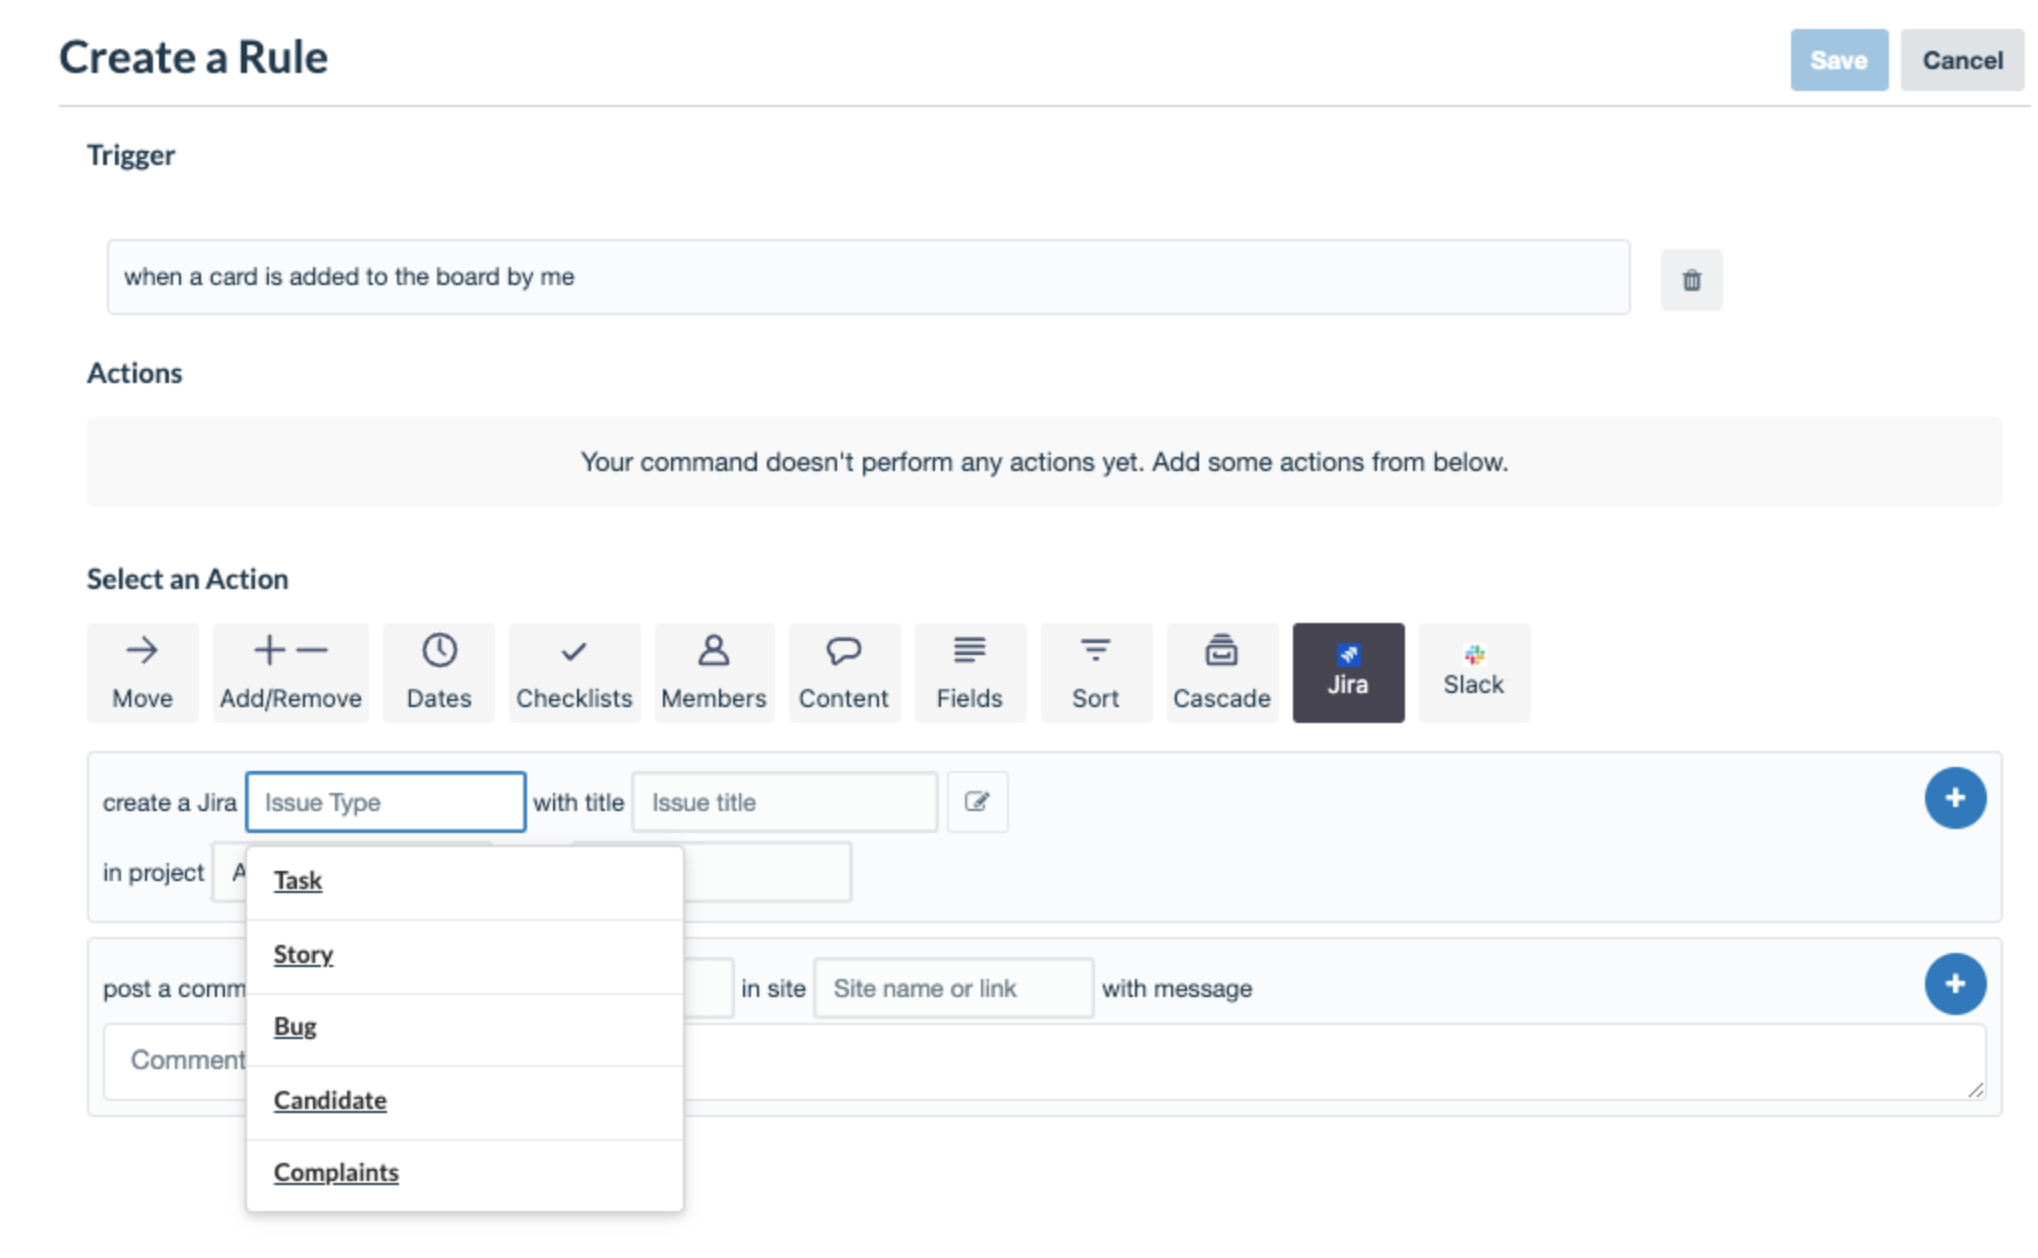 Select issue type in Action to create jira issue from Trello Automation rule